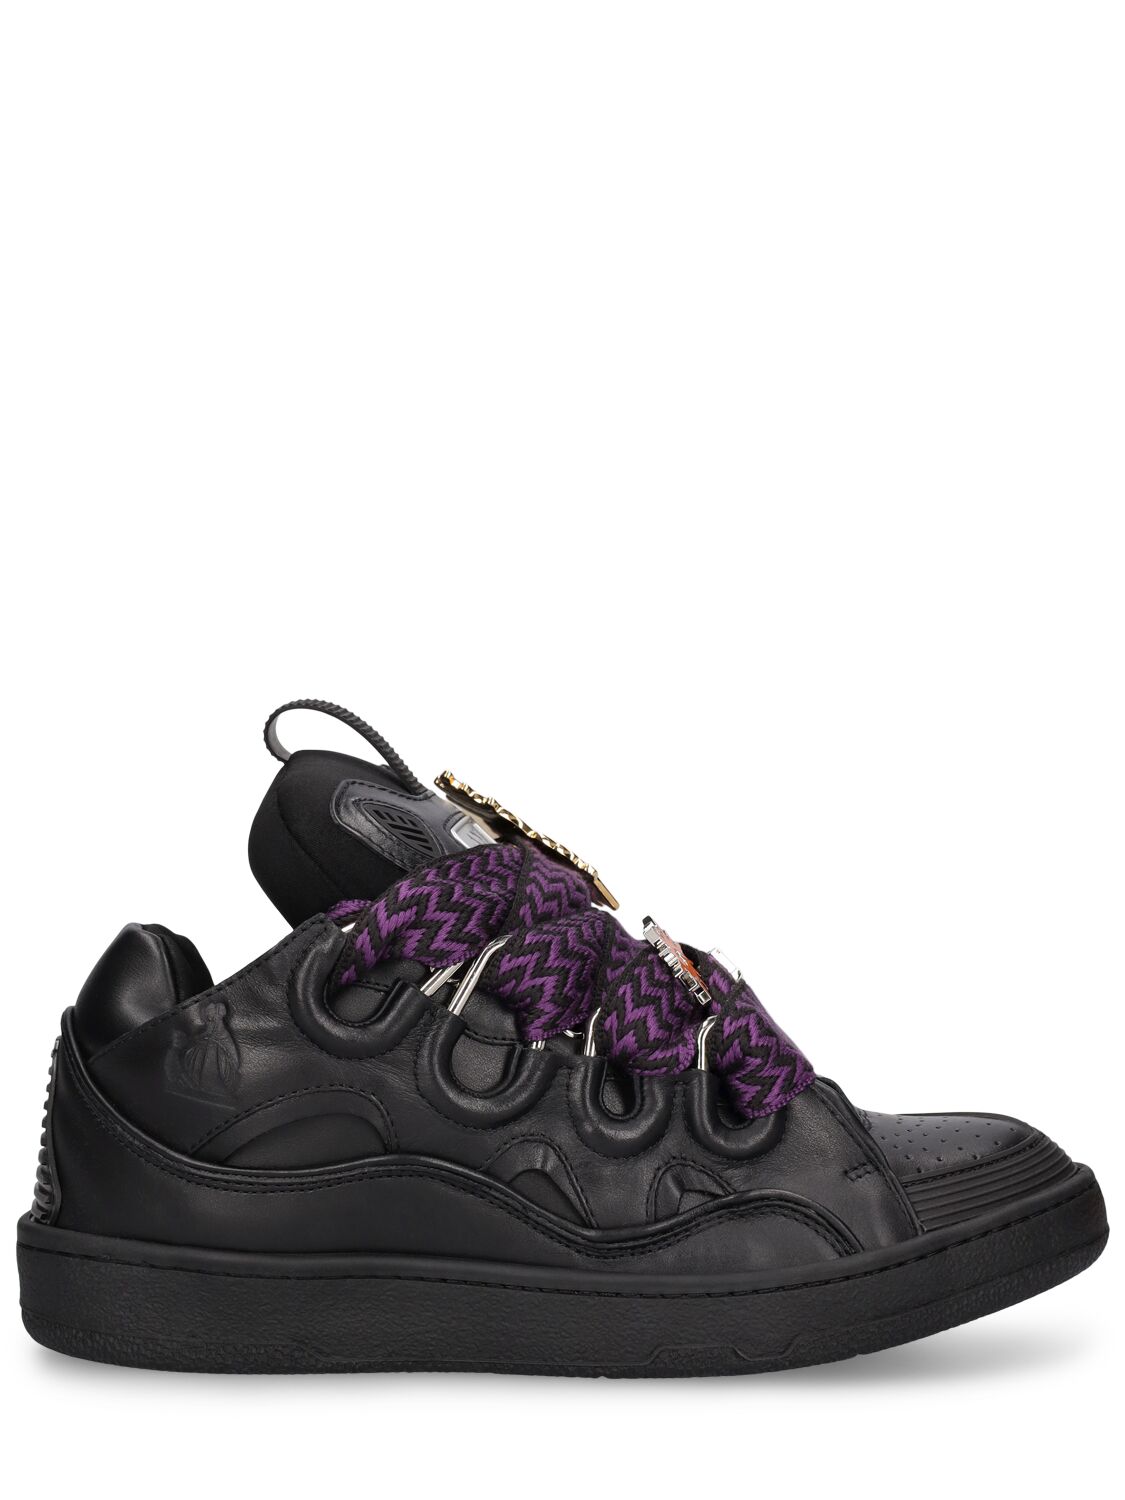 Lanvin Curb Leather And Pins Sneakers In Black